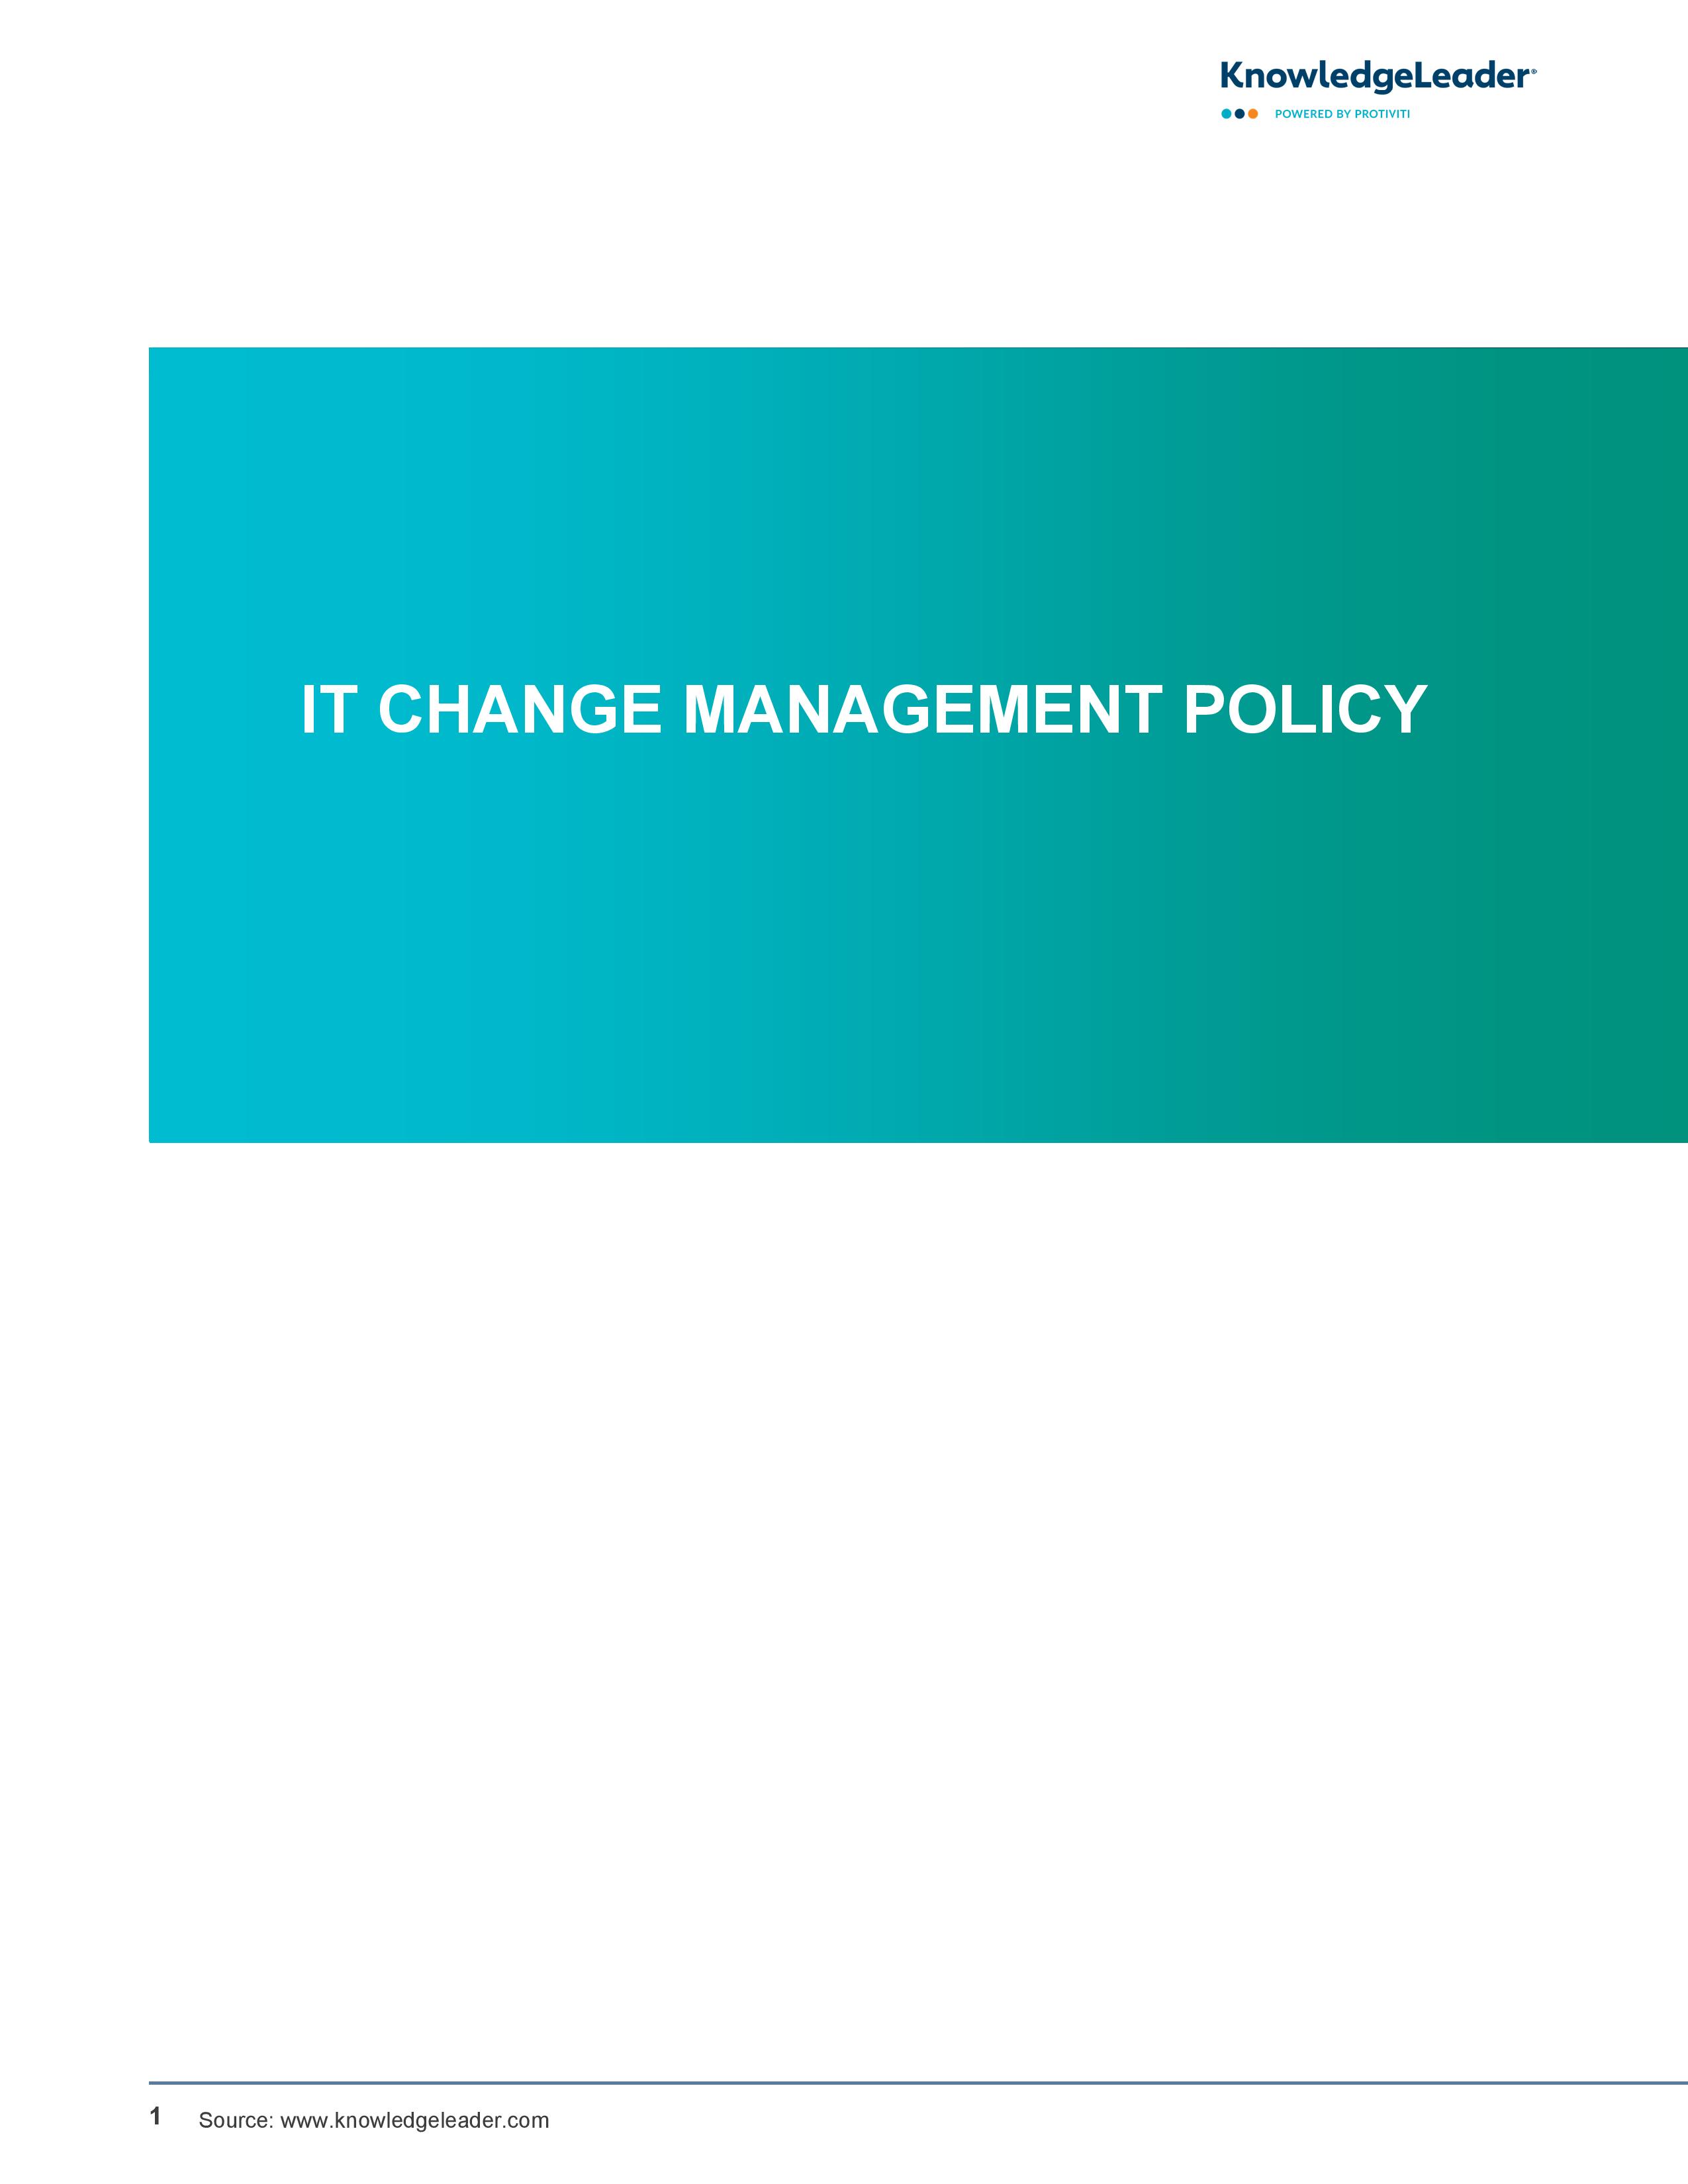 Screenshot of the first page of IT Change Management Policy